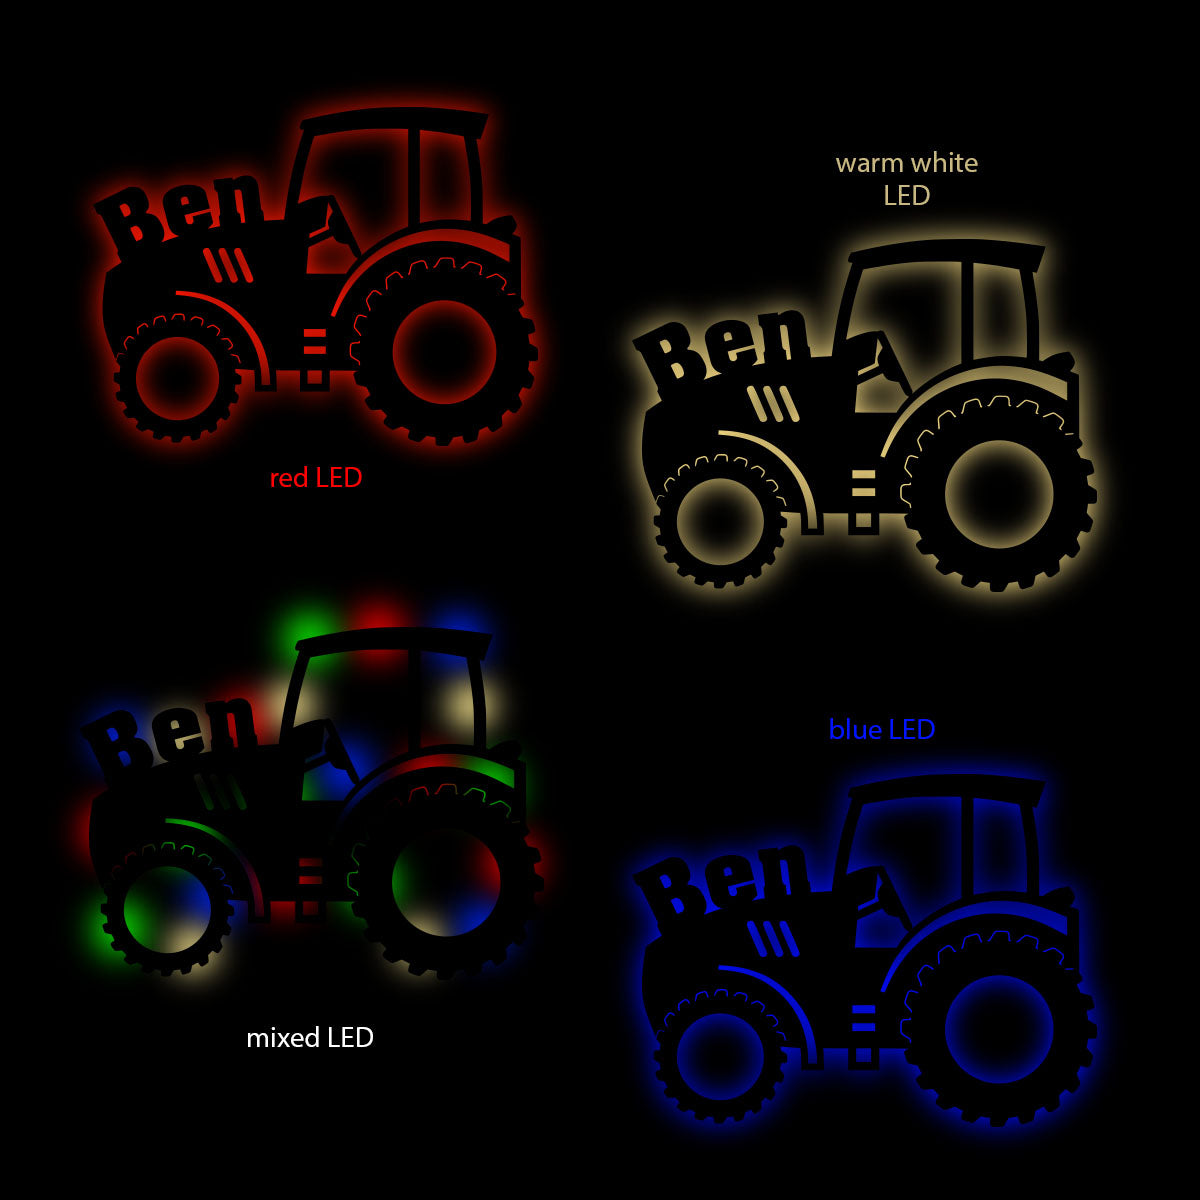 Farmer Tractor – Personalized Wall Decor with optional LED Light | Starting from: